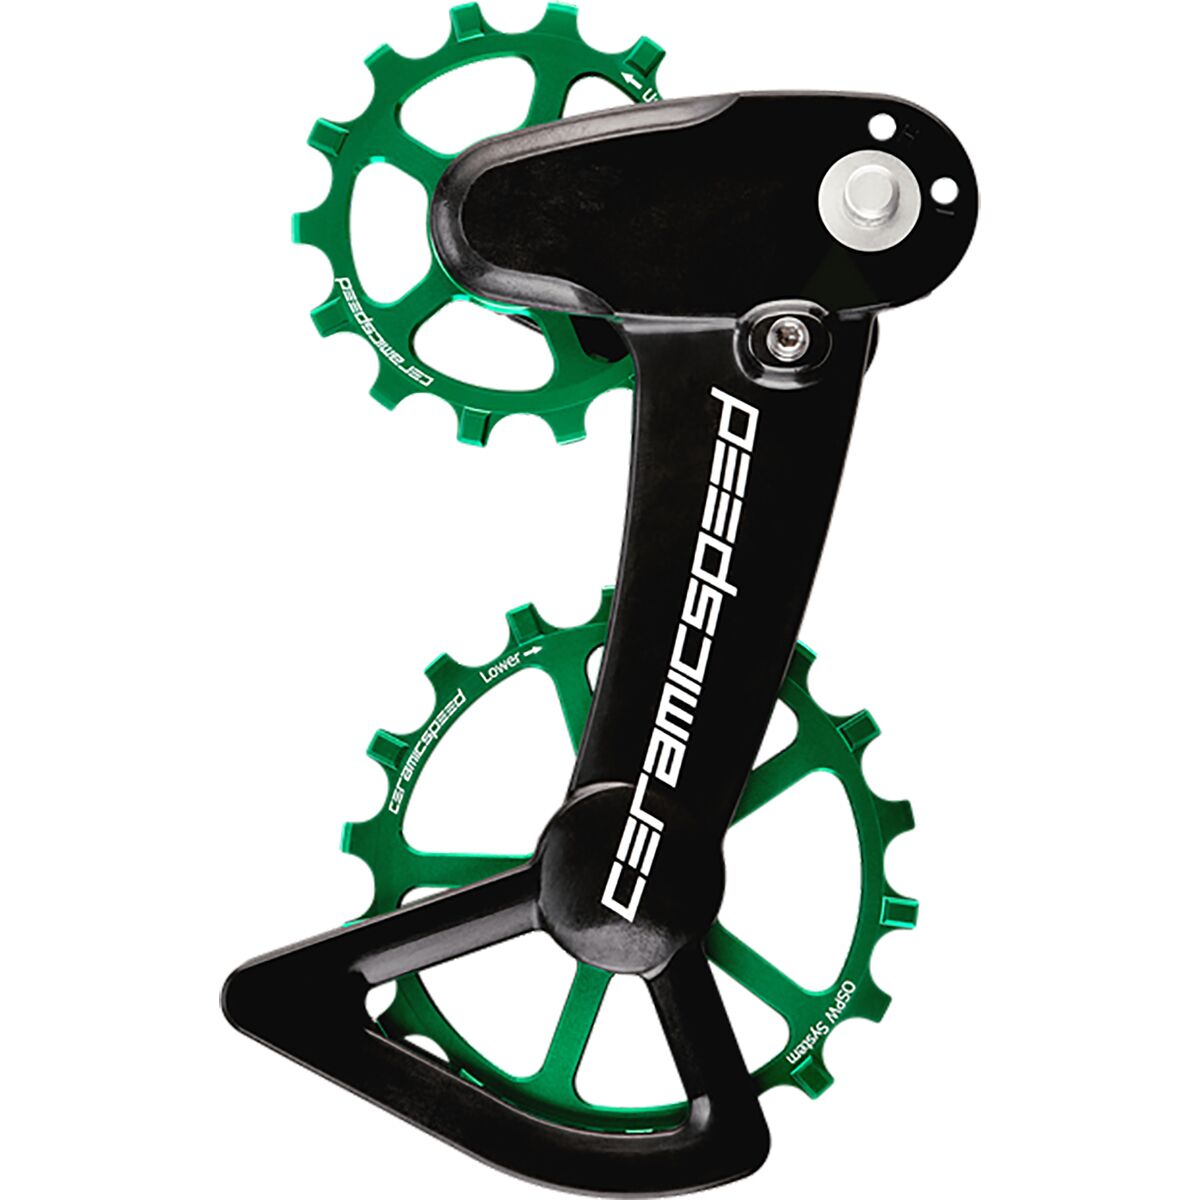 CeramicSpeed Oversized Pulley Wheel System - Limited Edition Green